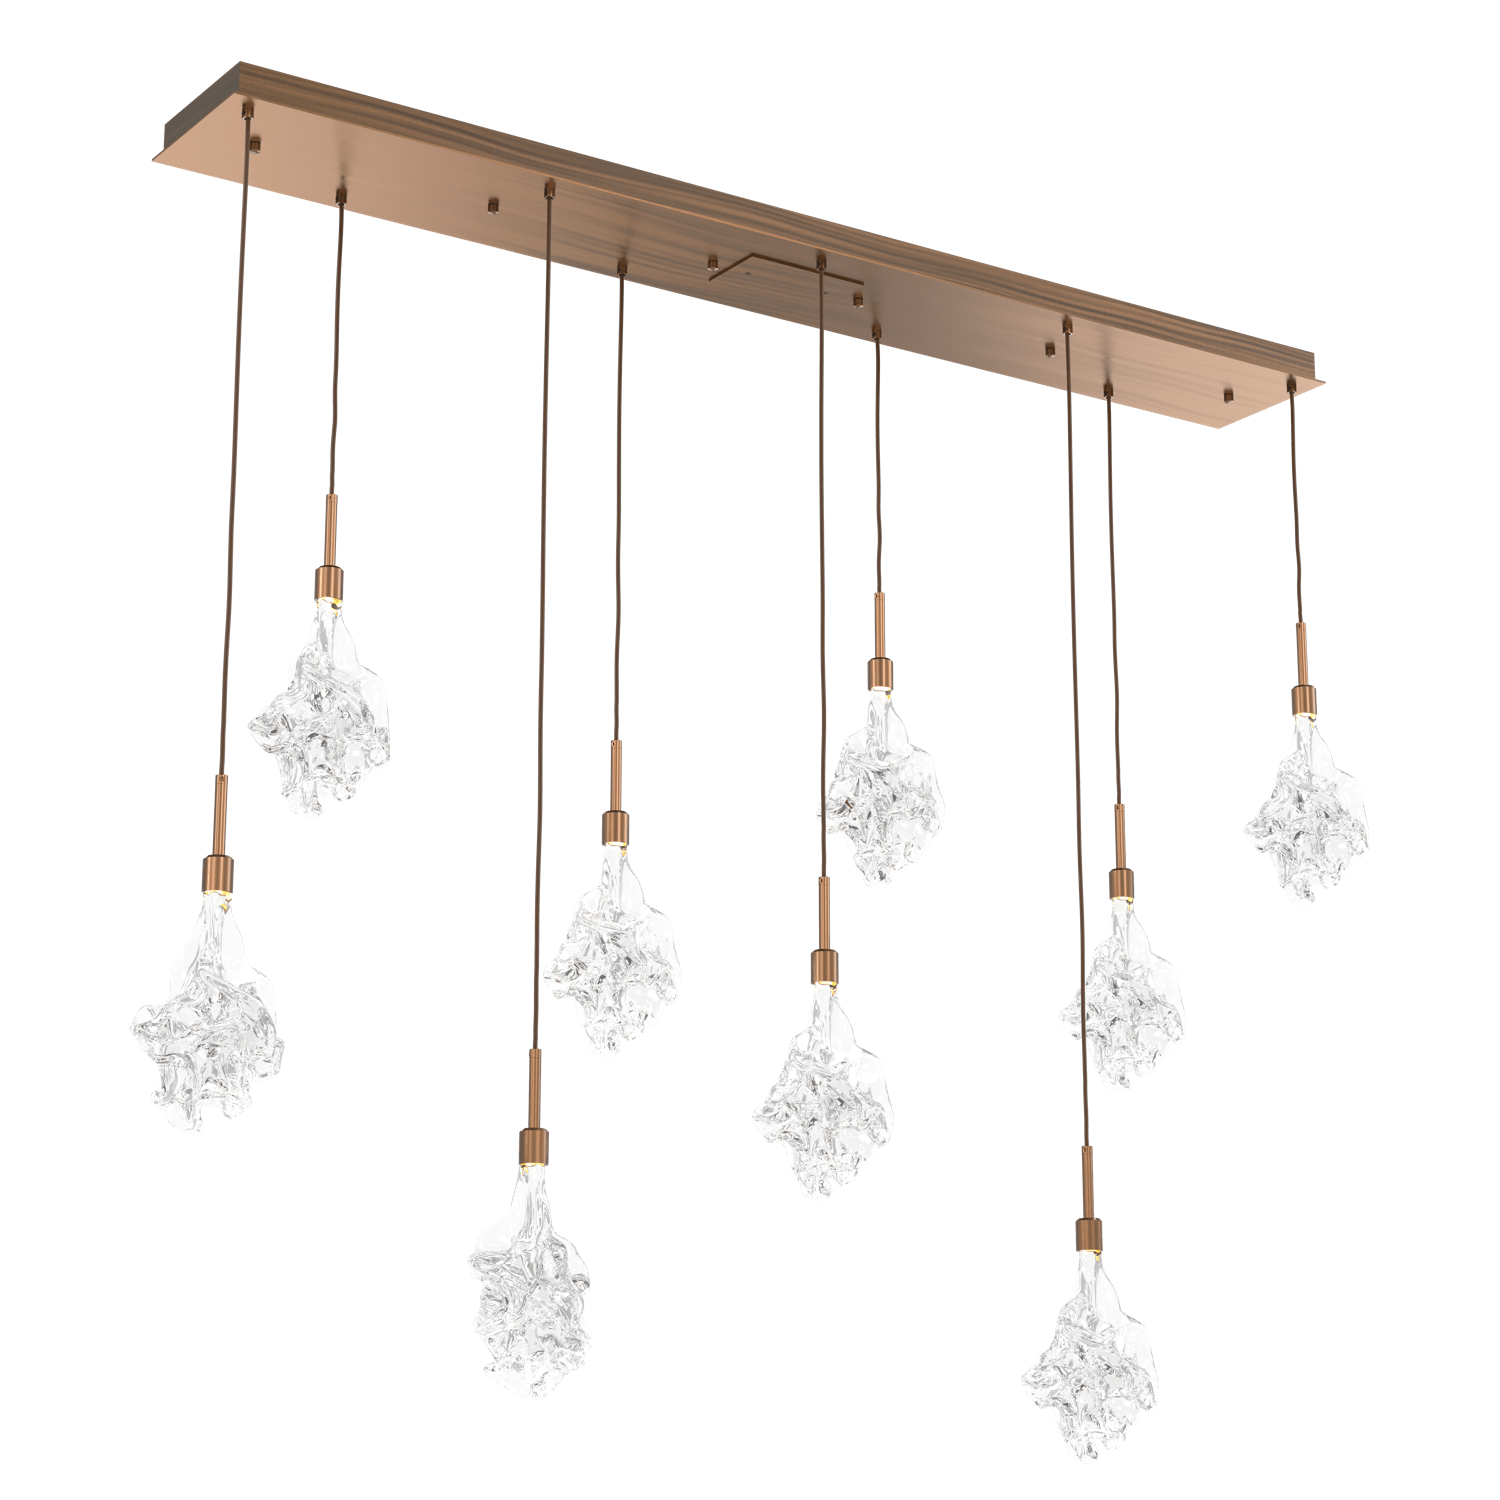 PLB0059-09-RB-Hammerton-Studio-Blossom-9-light-linear-pendant-chandelier-with-oil-rubbed-bronze-finish-and-clear-handblown-crystal-glass-shades-and-LED-lamping